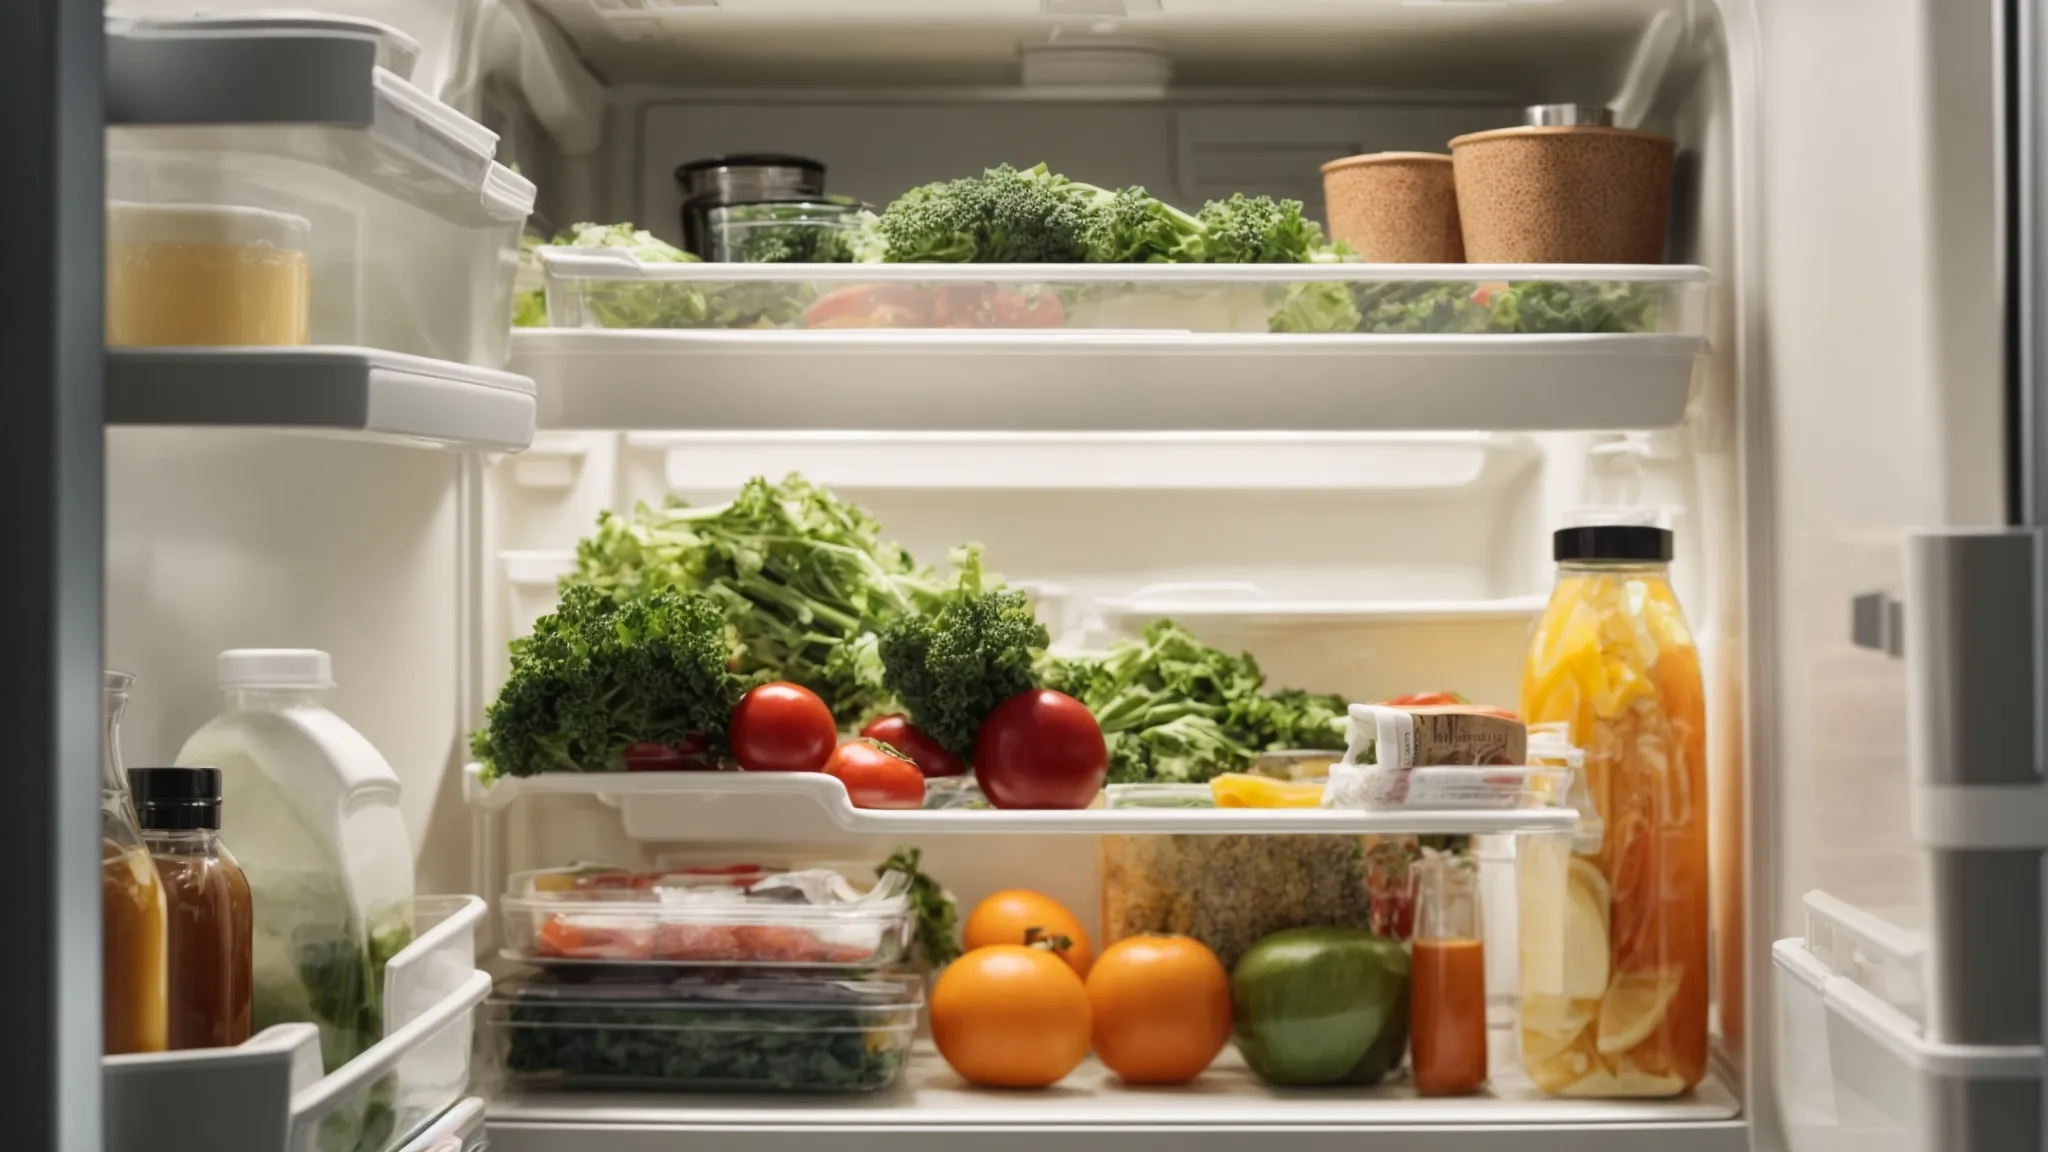 illustrate an open refrigerator being organized, with one person wiping shelves, another replacing old items with fresh produce, and eco-friendly cleaning products displayed on the counter. Bright, clean light fills the scene.